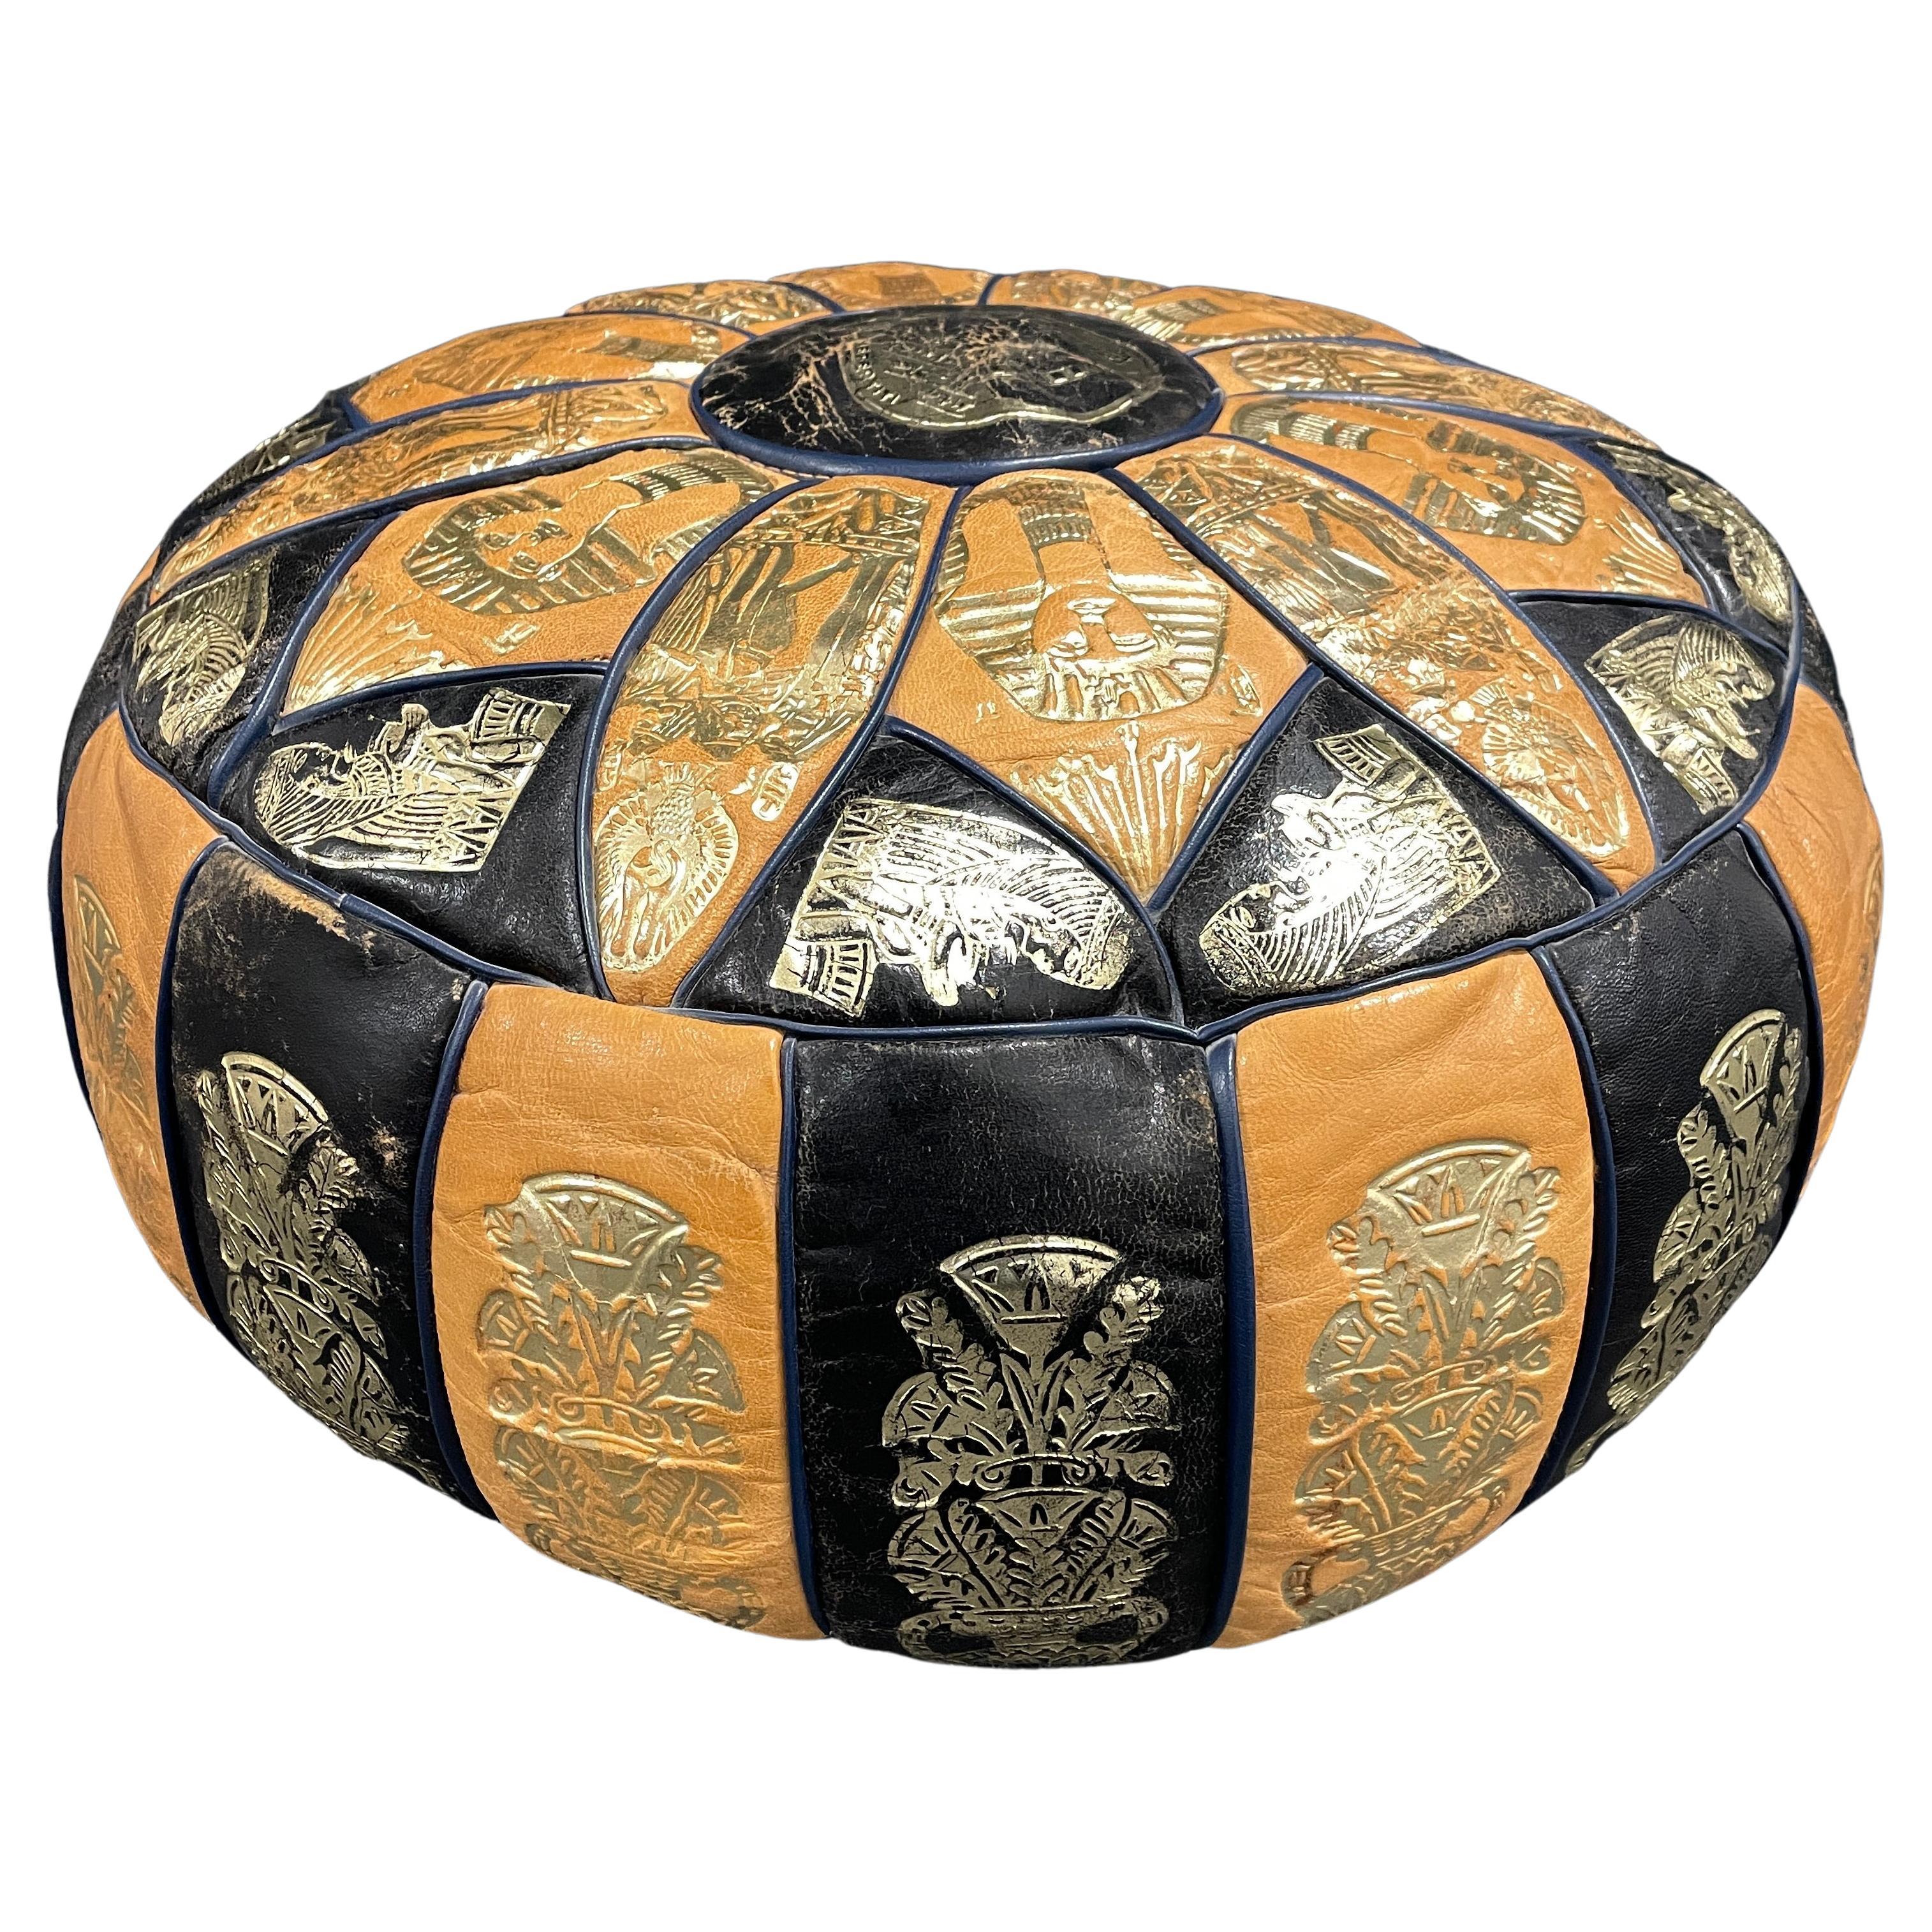 Egypt Pictured Pouf Ottoman Footrest Poof Pouffe Made of Leather, 1970s